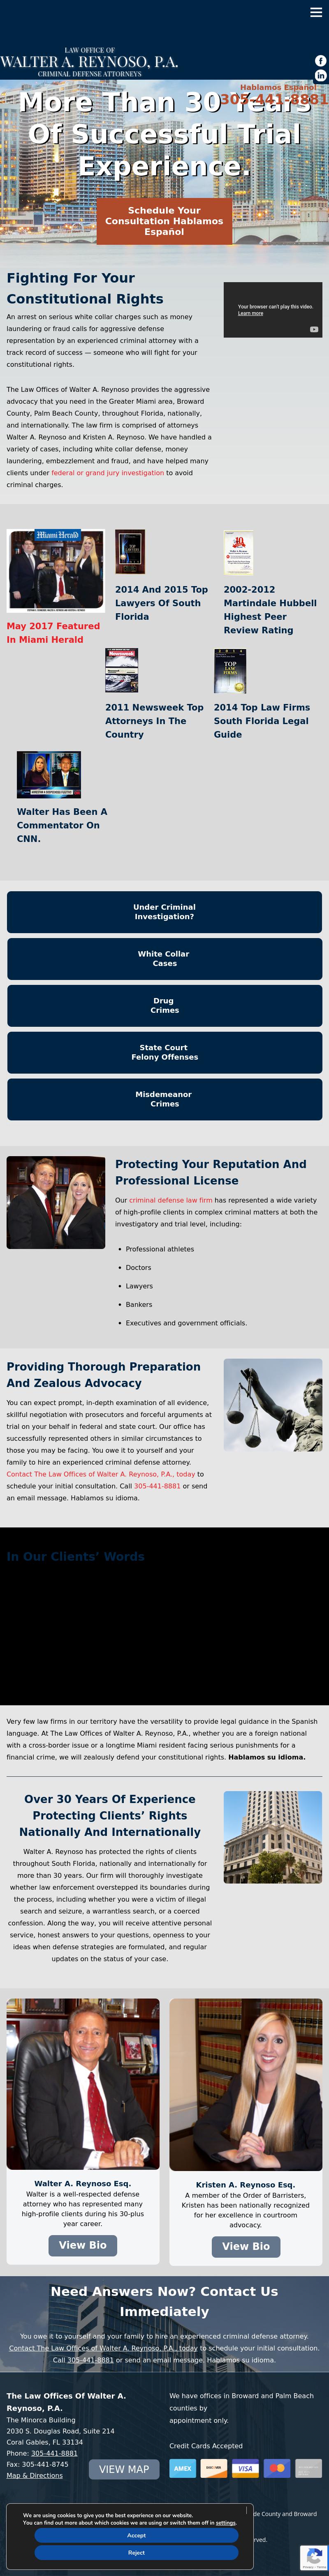 The Law Offices of Walter A. Reynoso, P.A. - Coral Gables FL Lawyers